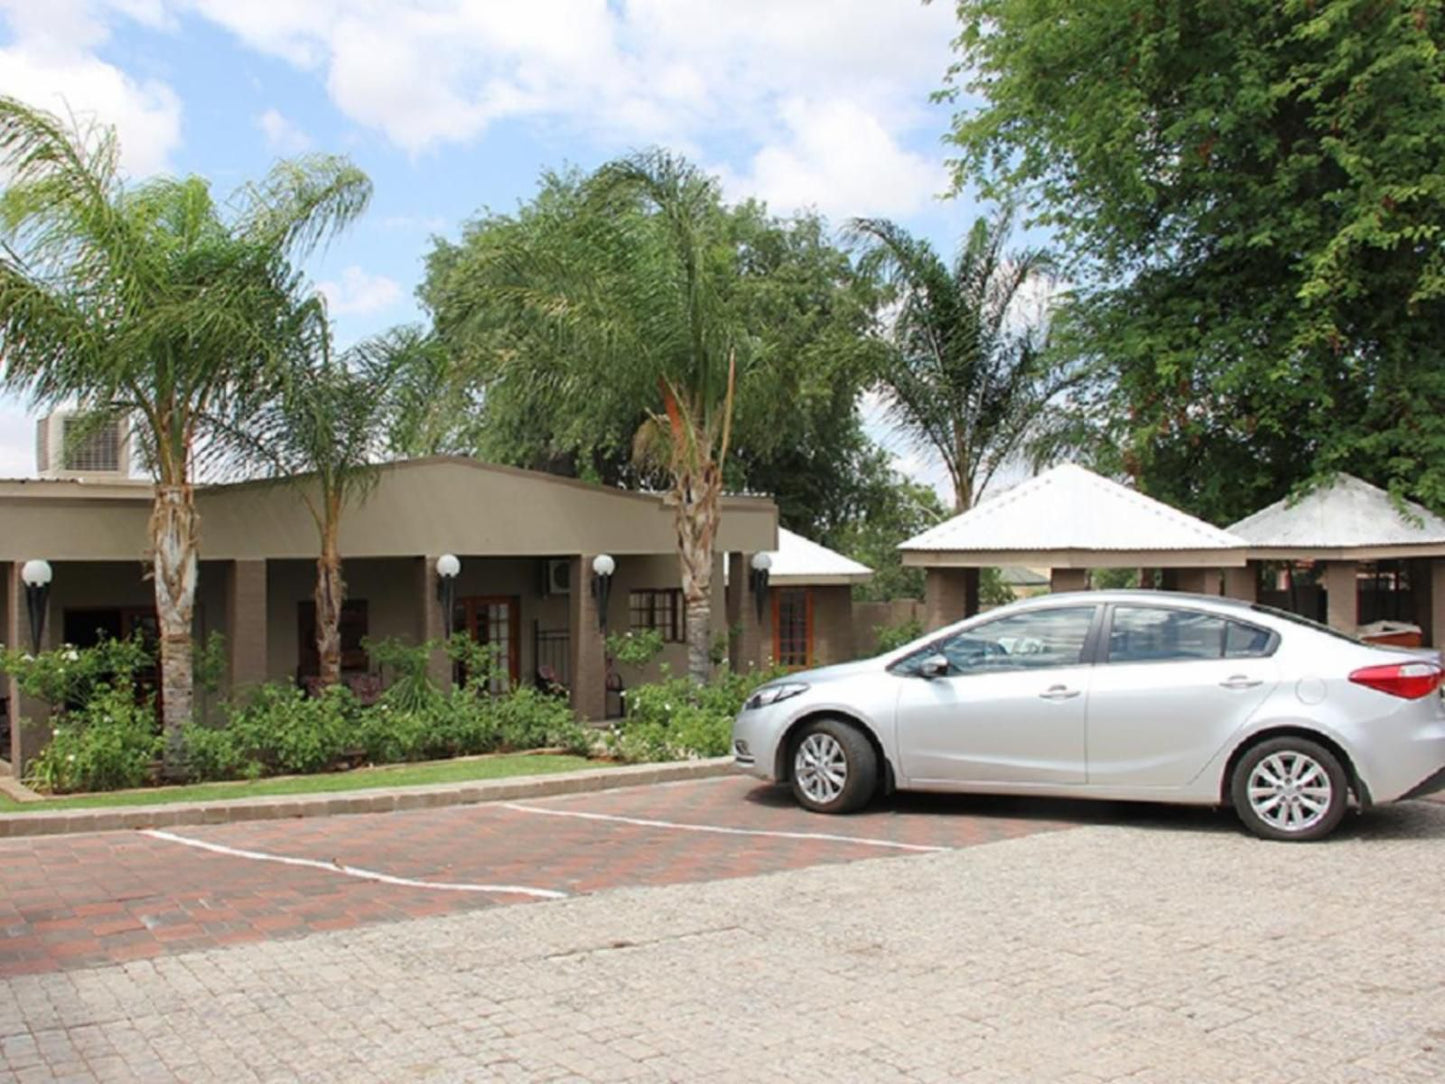 Allianto Boutique Hotel Keidebees Upington Northern Cape South Africa House, Building, Architecture, Car, Vehicle